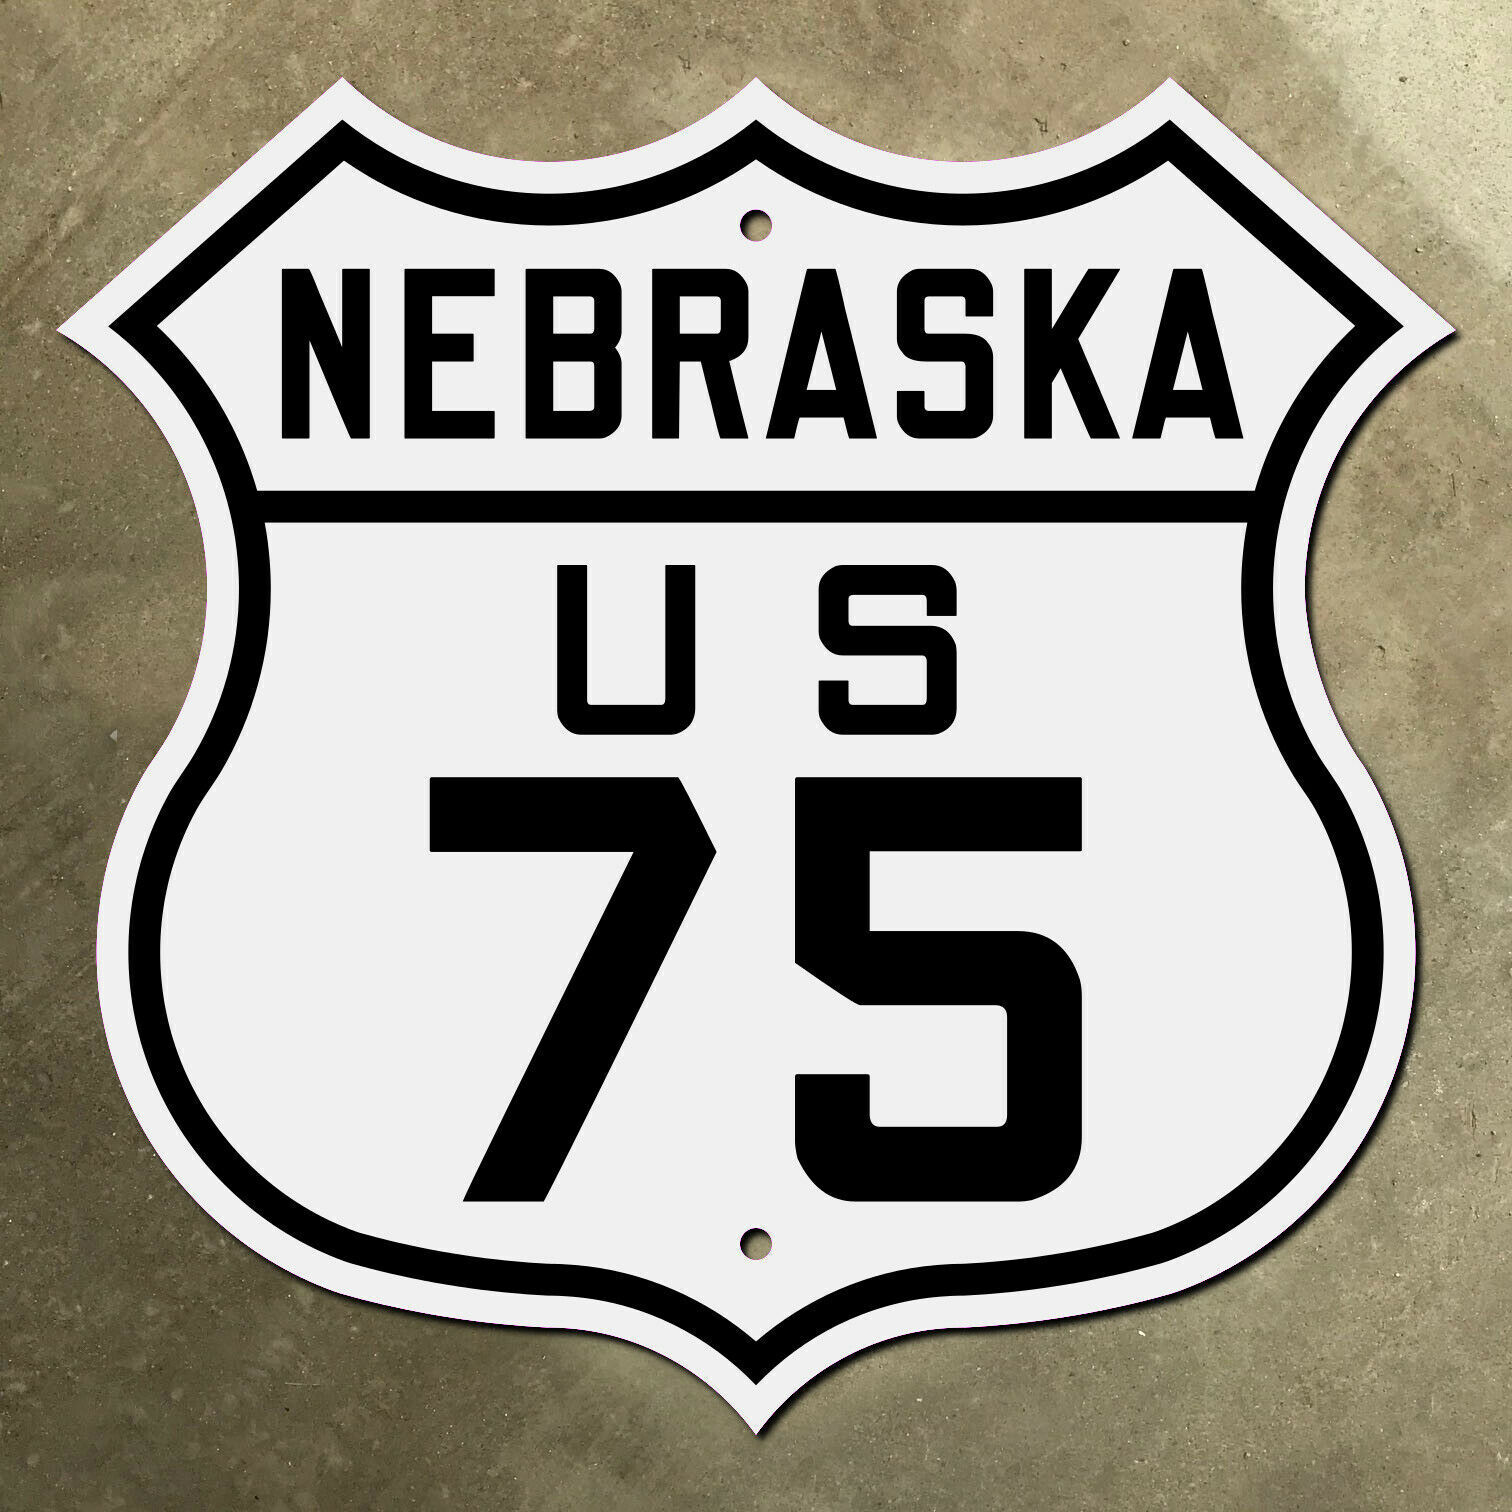 Nebraska US 75 Omaha South Sioux City highway route marker road sign 1926 16x16